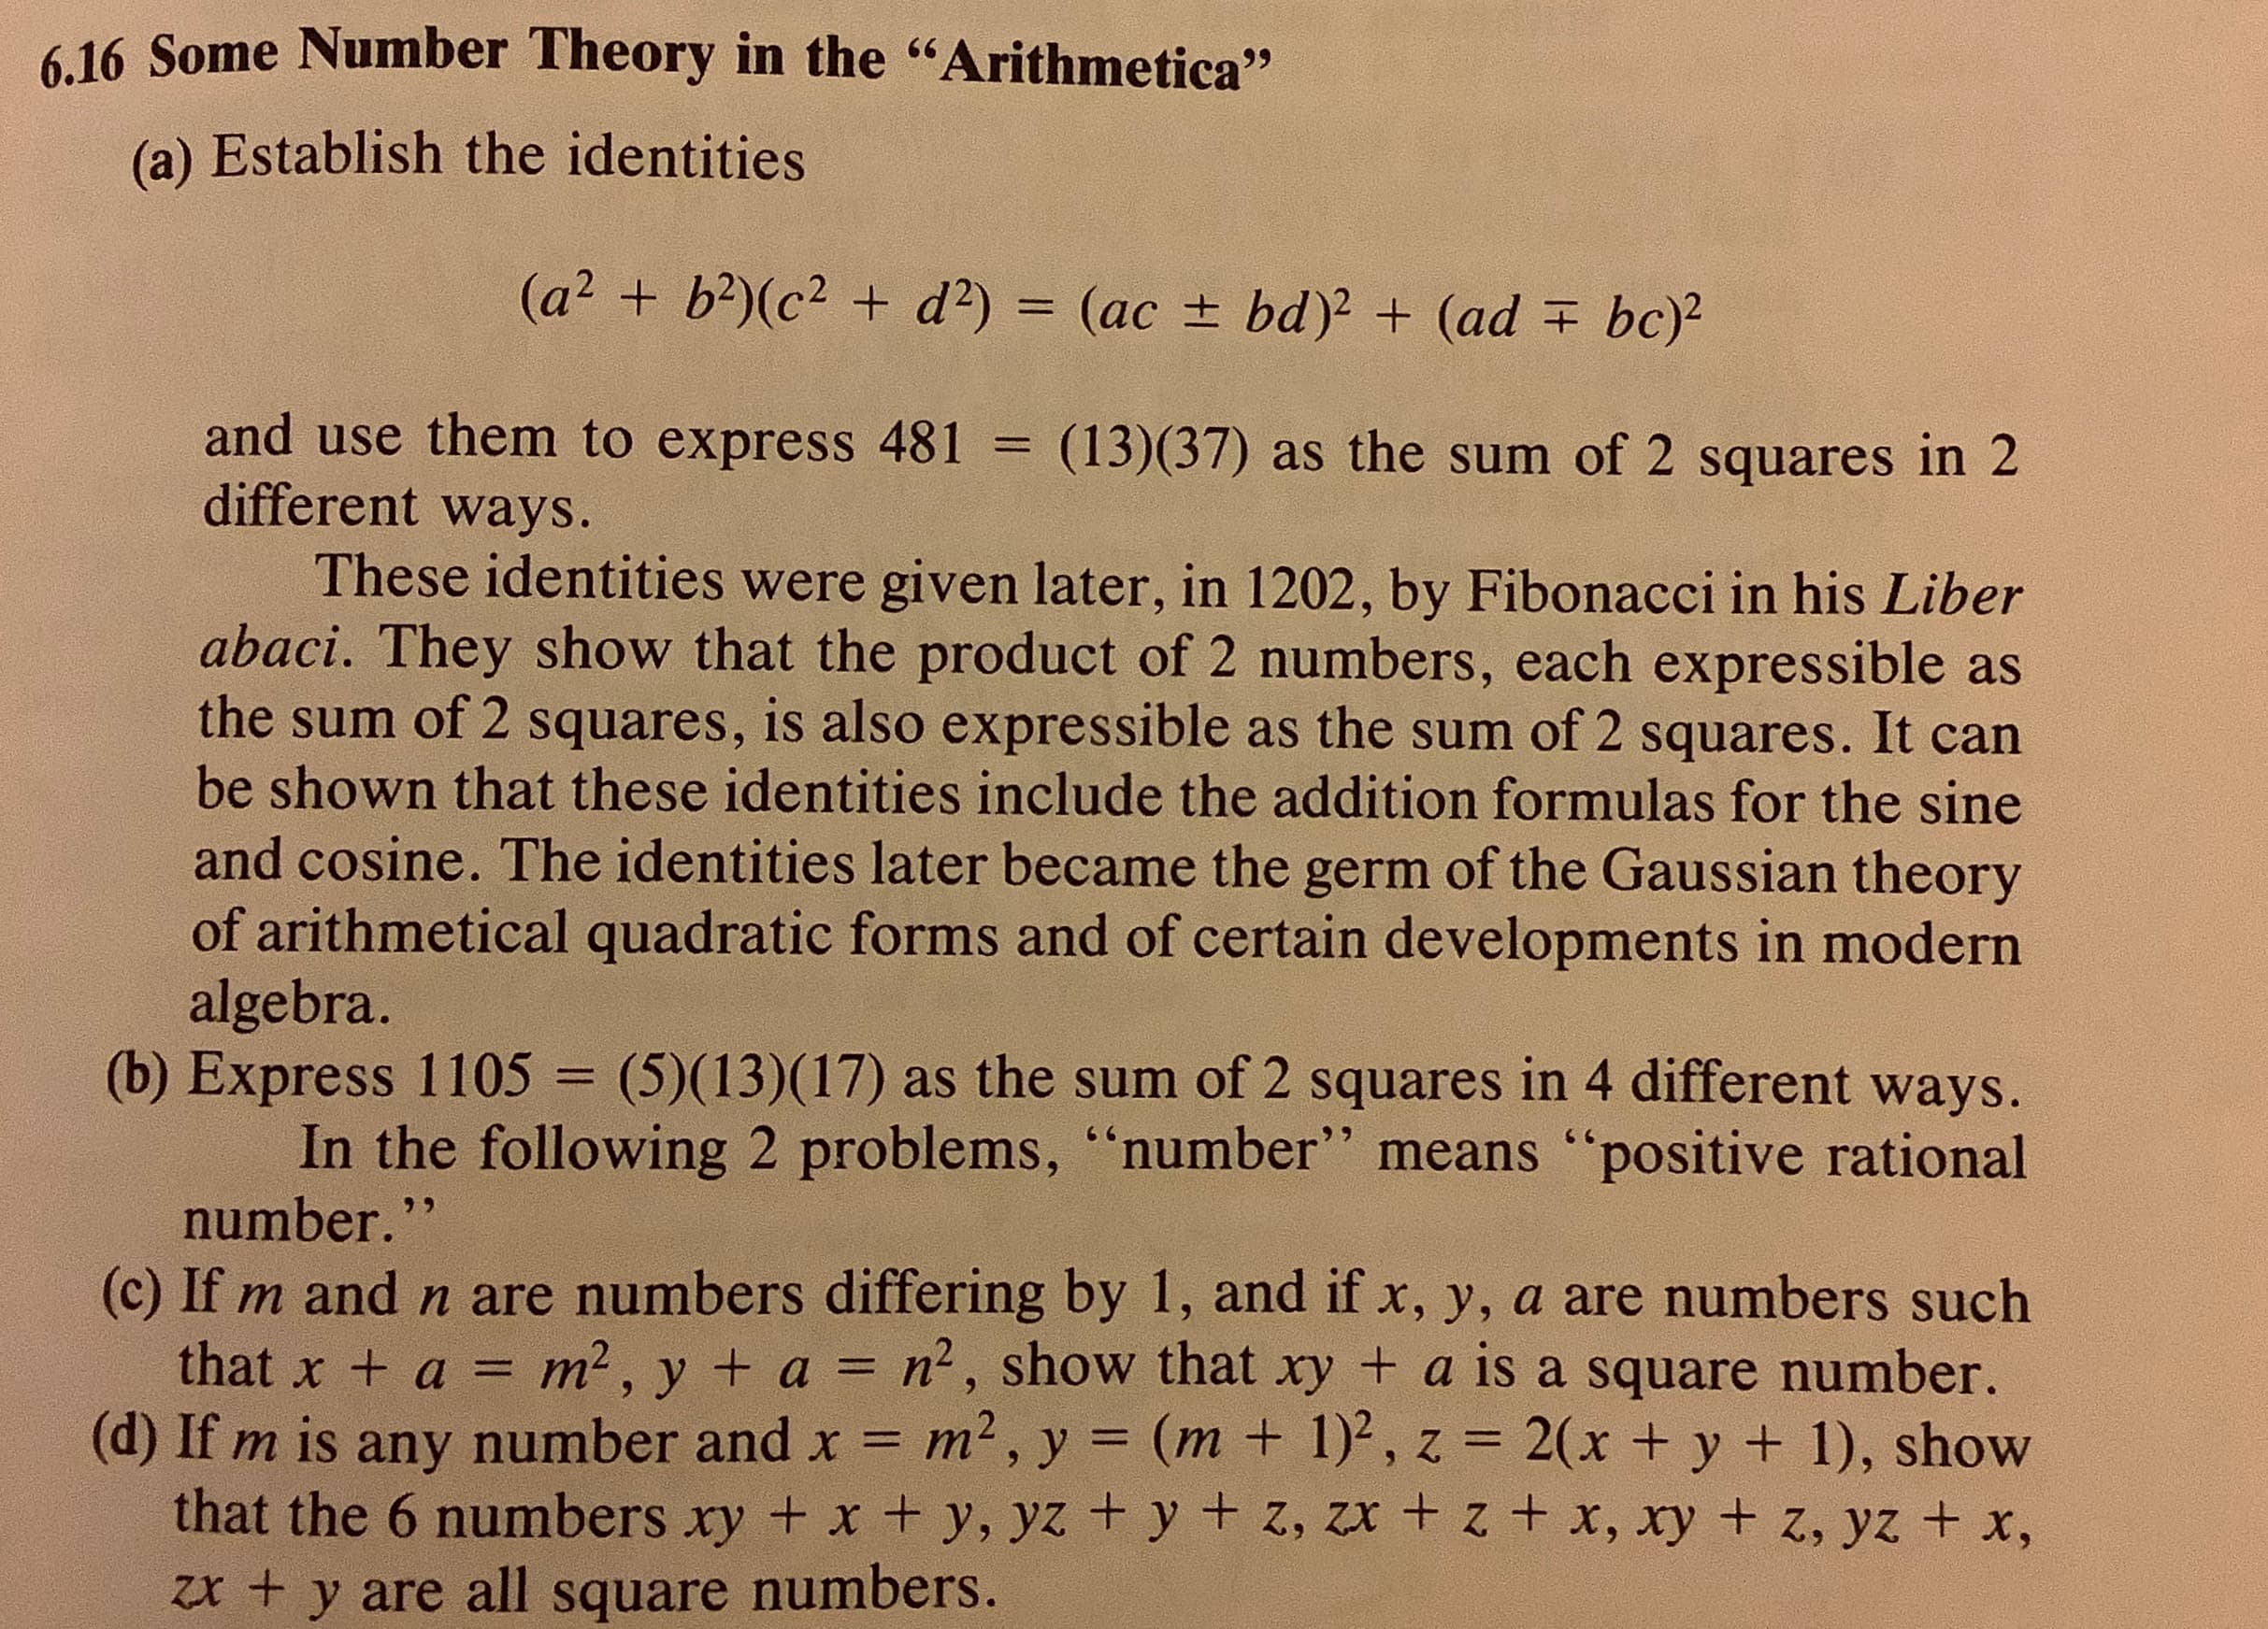 6.16 Some Number Theory in the "Arithmetica"
(a) Establish the identities
(a² + b?)(c² + d?) = (ac ± bd)2 + (ad + bc)²
and use them to express 481 = (13)(37) as the sum of 2 squares in 2
different ways.
%3D
These identities were given later, in 1202, by Fibonacci in his Liber
abaci. They show that the product of 2 numbers, each expressible as
the sum of 2 squares, is also expressible as the sum of 2 squares. It can
be shown that these identities include the addition formulas for the sine
and cosine. The identities later became the germ of the Gaussian theory
of arithmetical quadratic forms and of certain developments in modern
algebra.
(b) Express 1105 = (5)(13)(17) as the sum of 2 squares in 4 different ways.
In the following 2 problems, “number" means "positive rational
number."
%3D
(c) If m and n are numbers differing by 1, and if x, y, a are numbers such
that x + a = m², y + a = n2, show that xy + a is a square number.
(d) If m is any number and x = m2, y = (m + 1)², z = 2(x + y + 1), show
that the 6 numbers xy + x + y, yz + y + z, zx + z + x, xy + z, yz + x,
zx + y are all square numbers.
%3D
%3D
%3D
